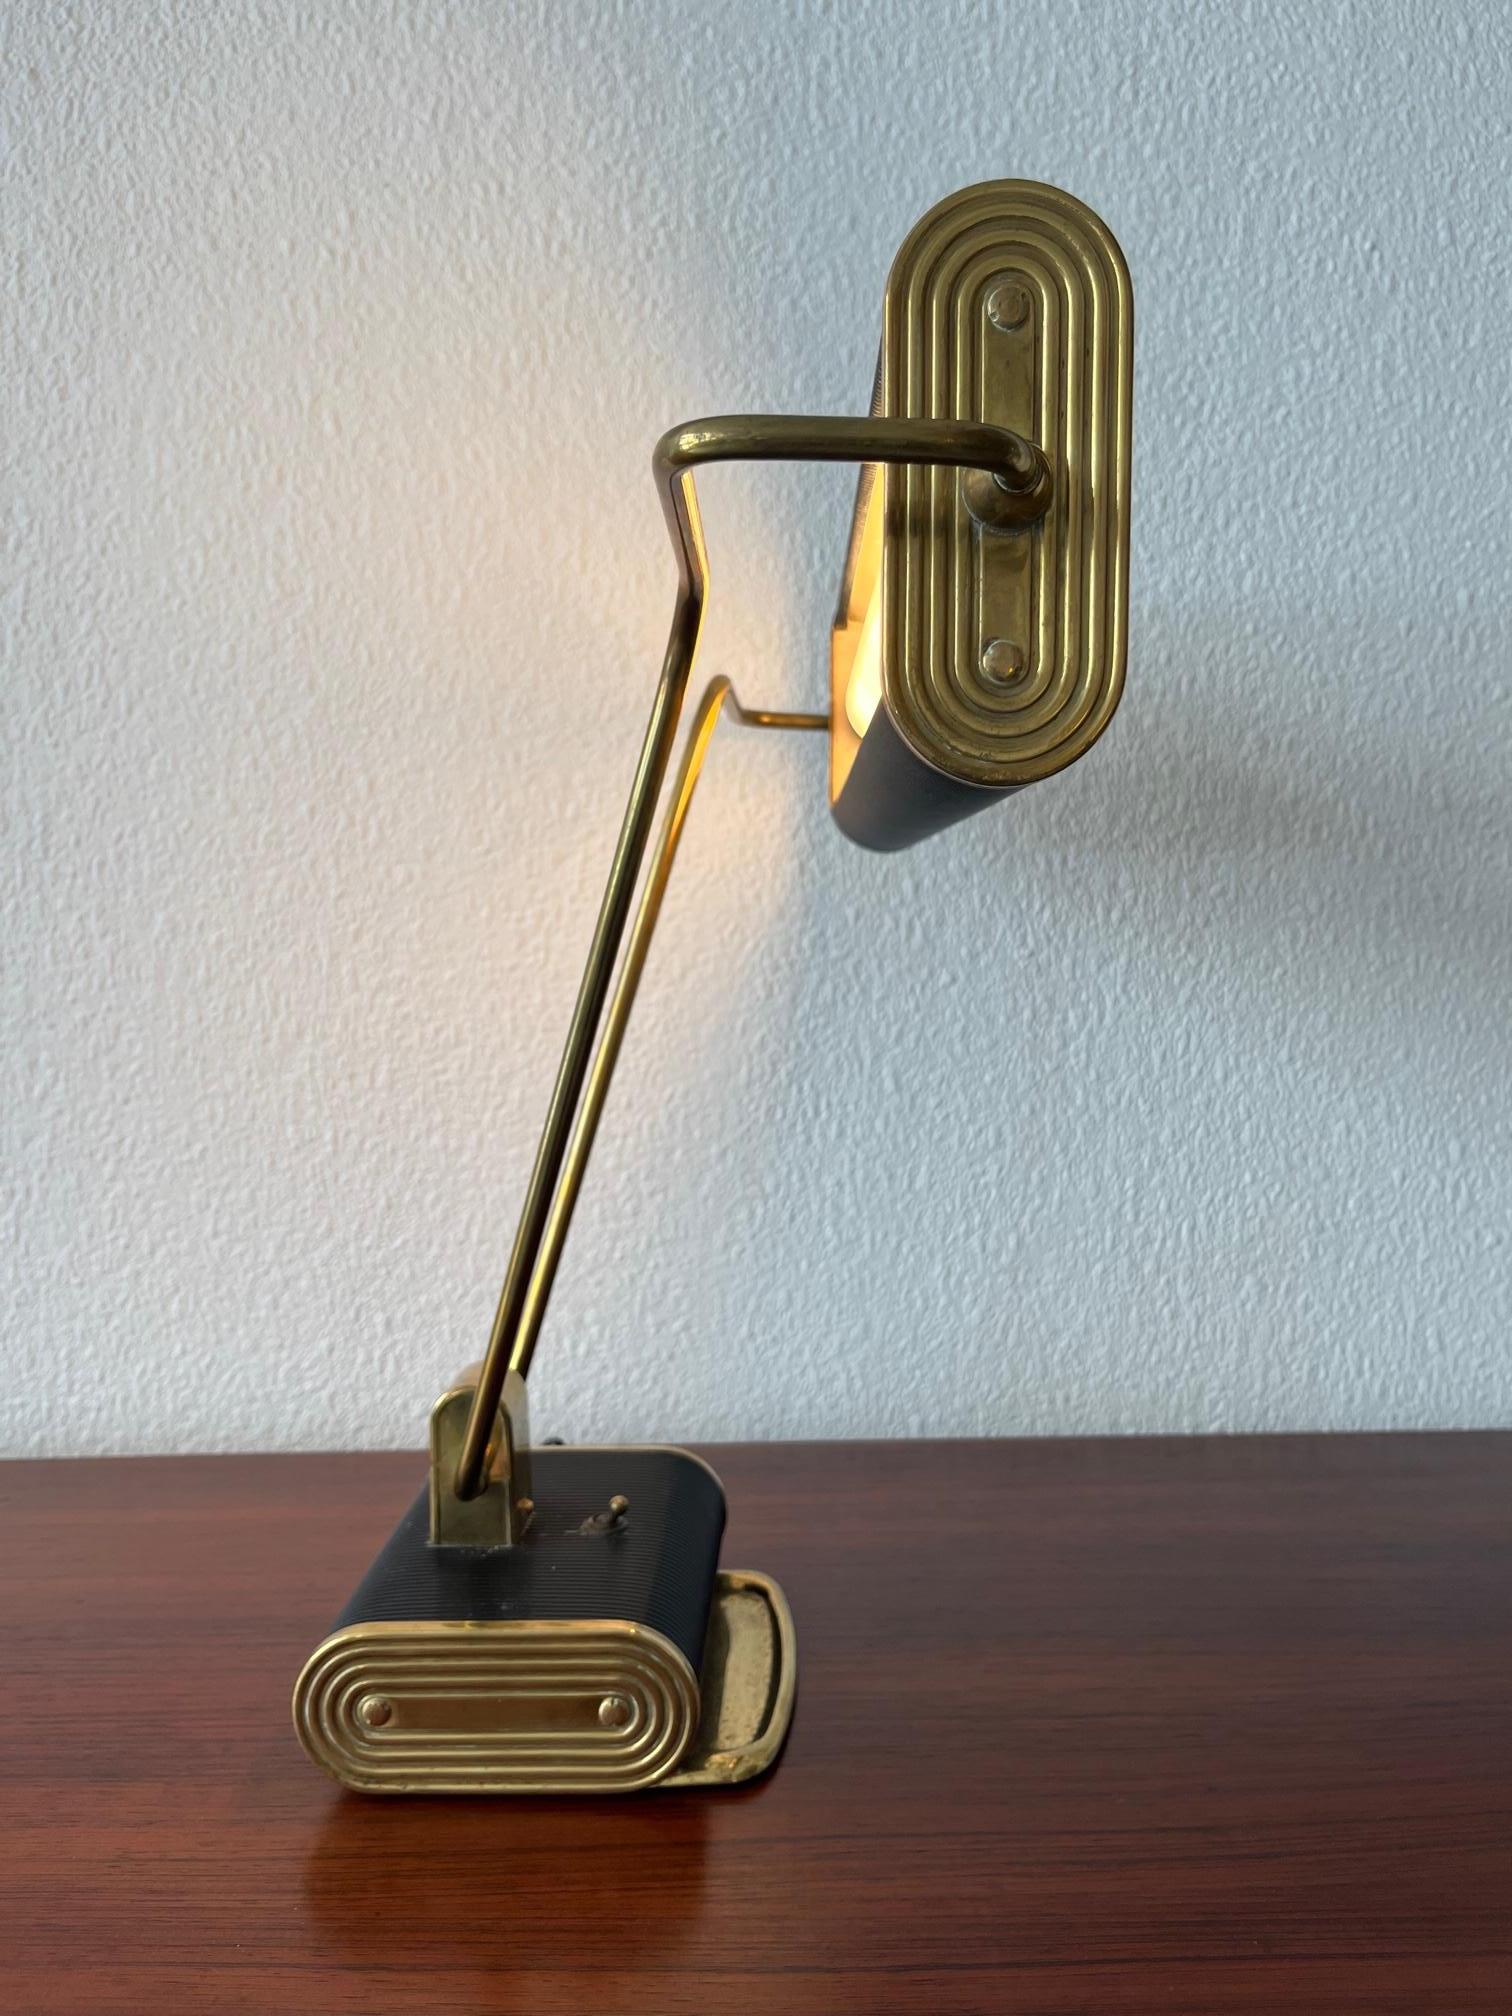 Mid-20th Century Brass & Aluminum Adjustable Desk Lamp by Eileen Gray for Jumo, France ca. 1940s For Sale